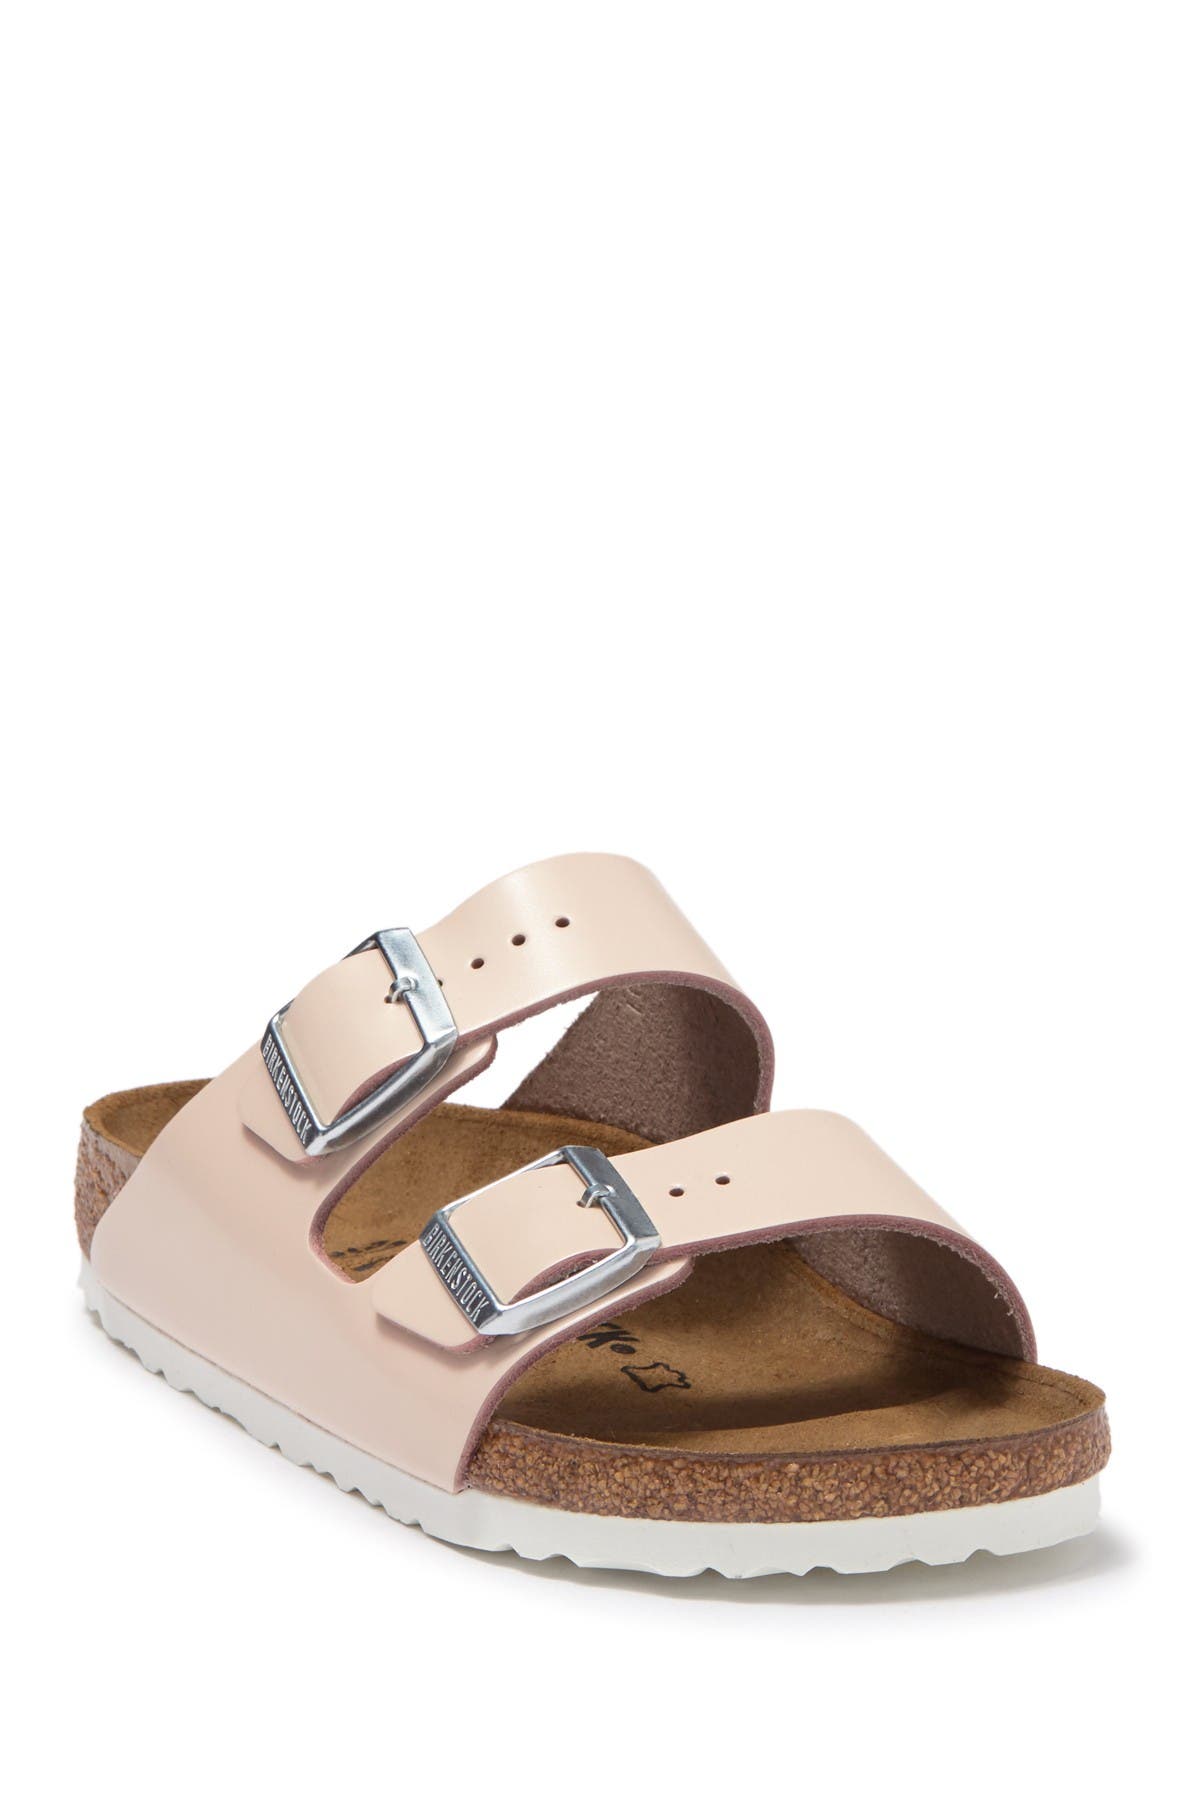 narrow width sandals for ladies